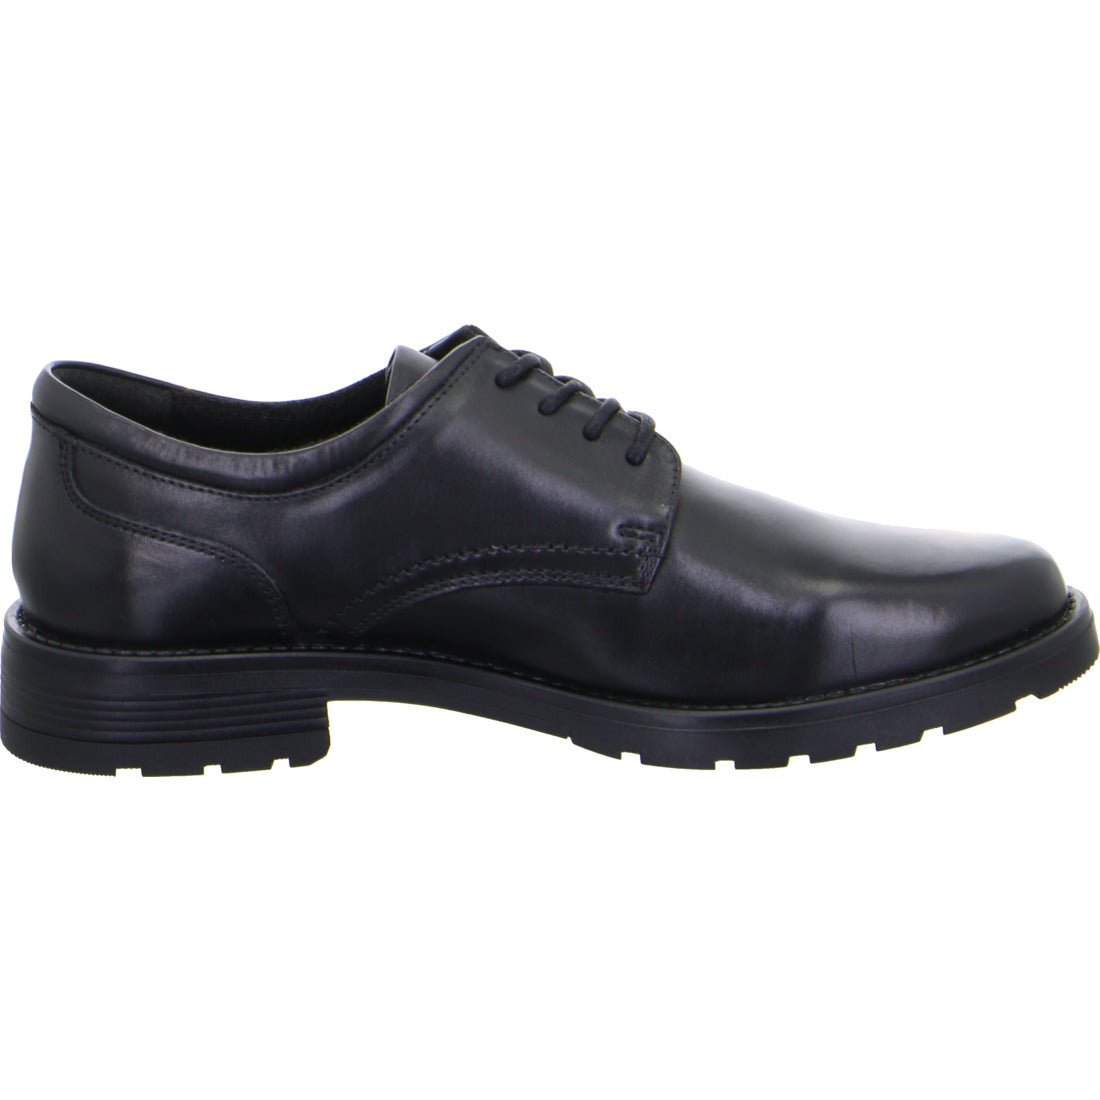 'Allesio' men's lace-up shoe from ARA - Chaplinshoes'Allesio' men's lace-up shoe from ARAAra